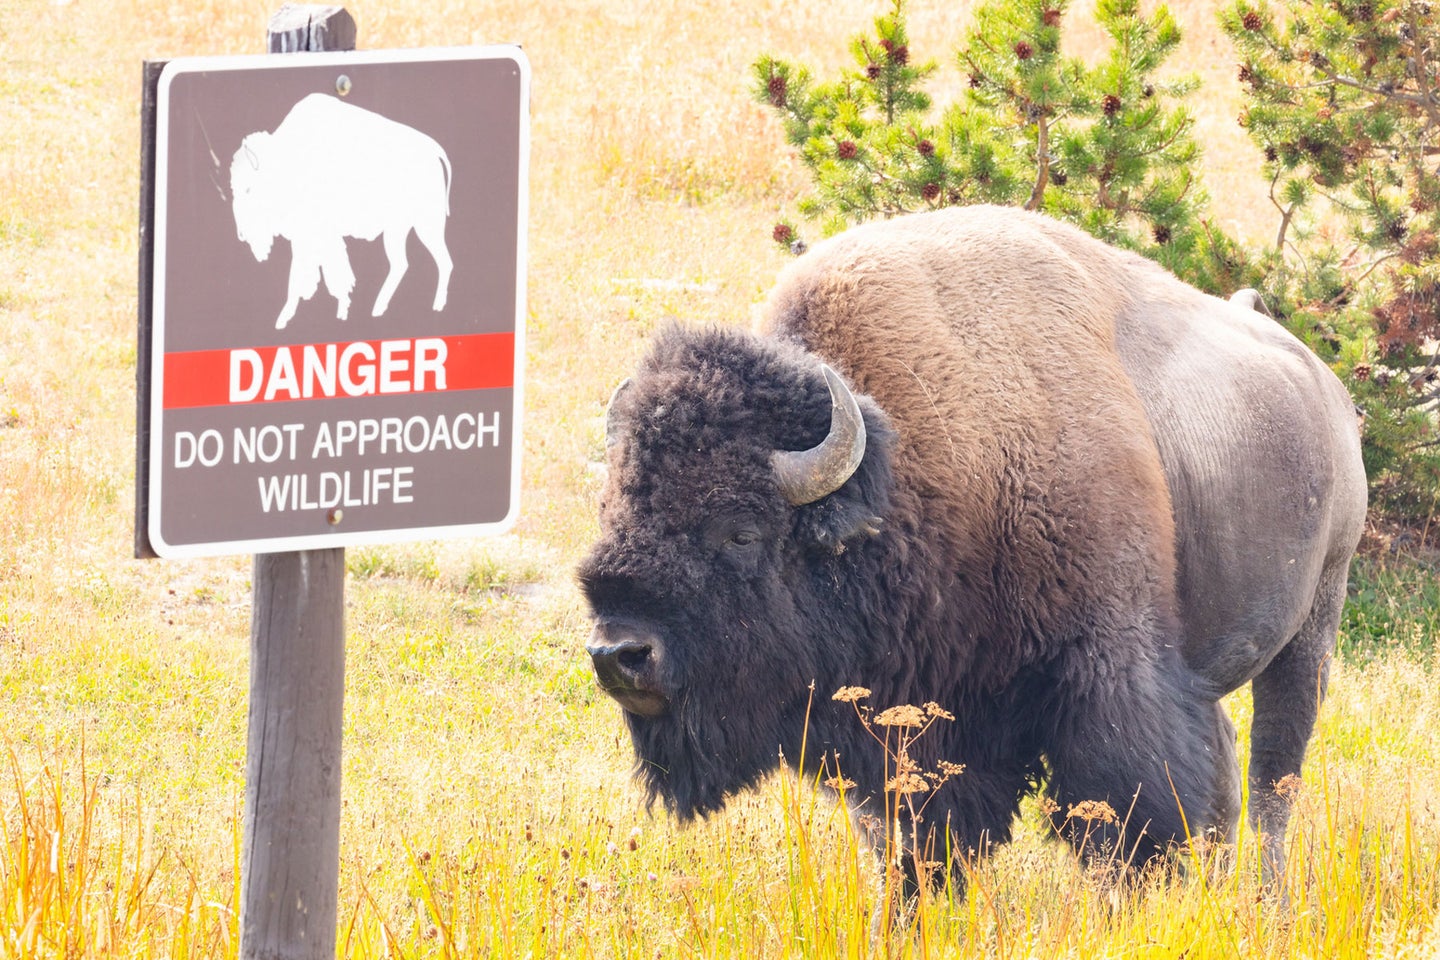 Yellowstone National Park is home to approximately 5,900 bison according to a count performed in the summer of 2022.